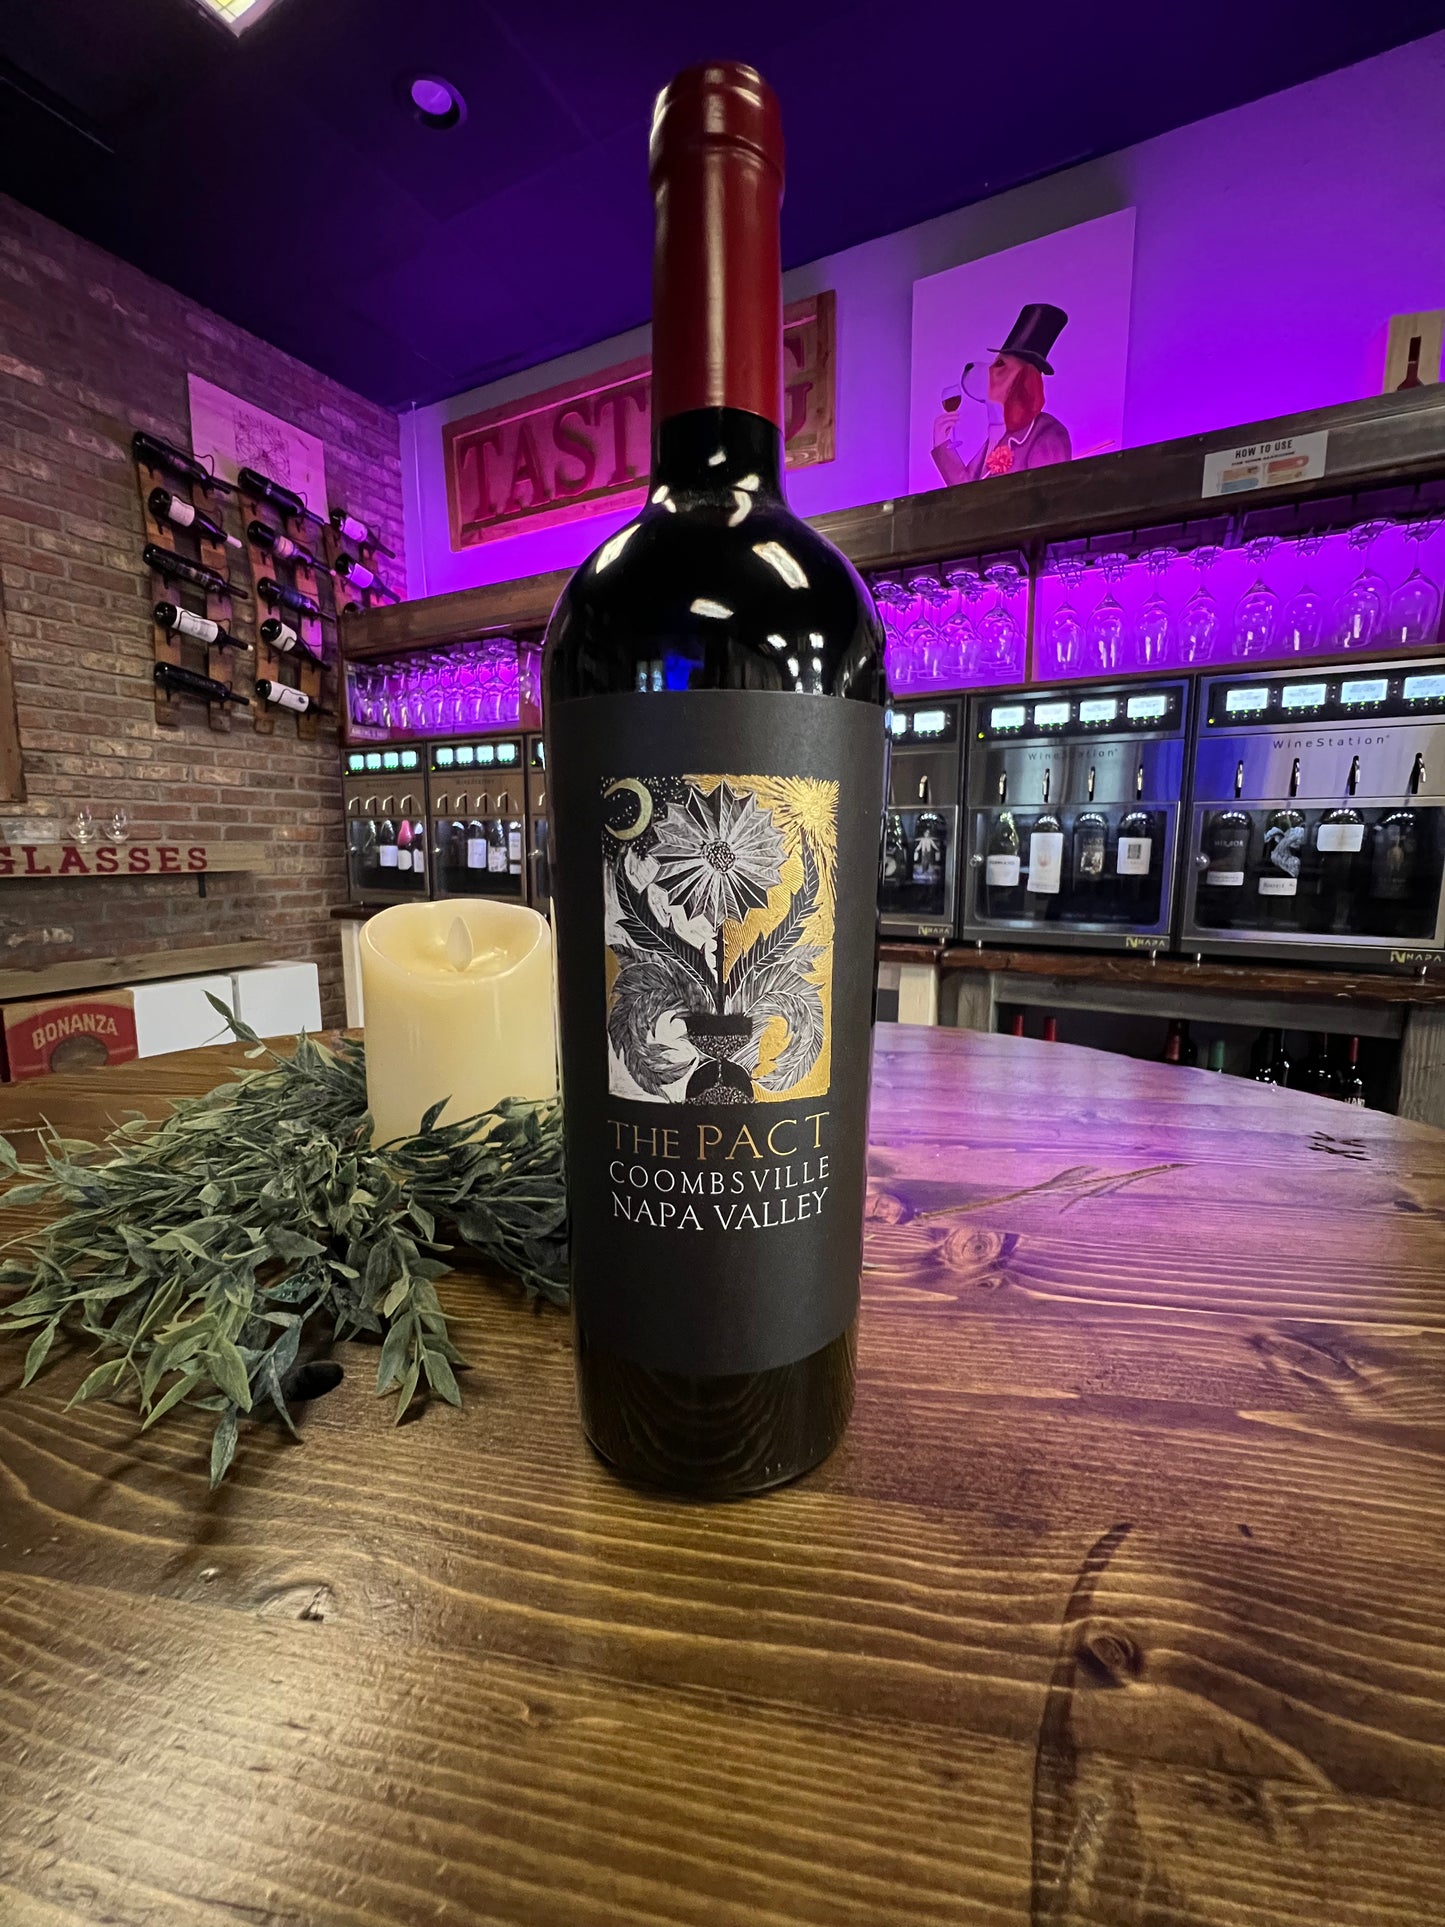 Faust “The Pact” Cabernet